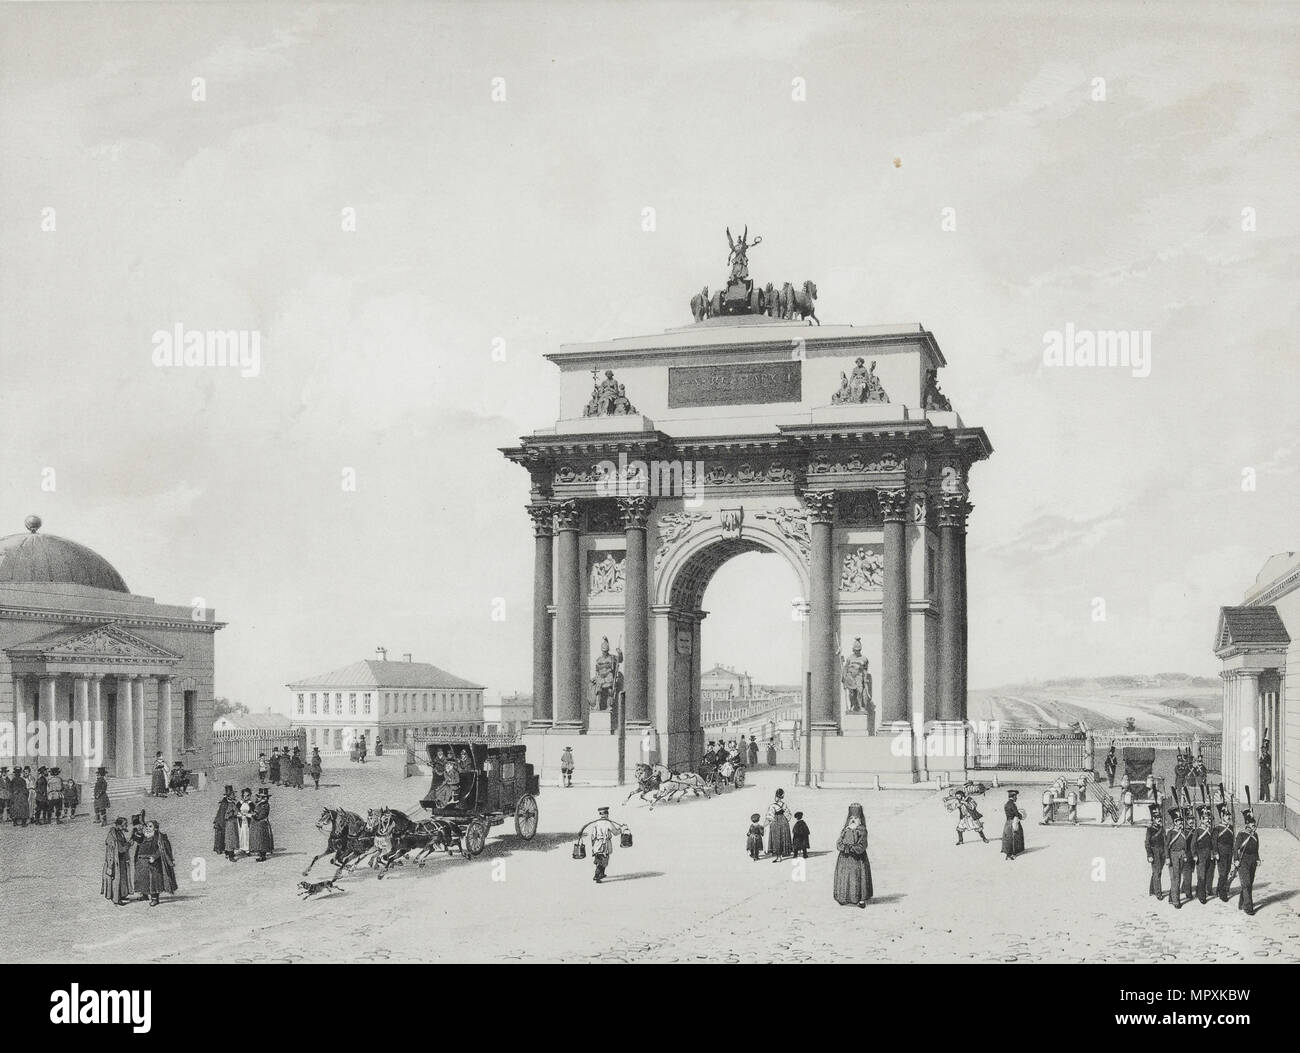 L'arco trionfale a Tver cancelli in Mosca, 1840s. Foto Stock